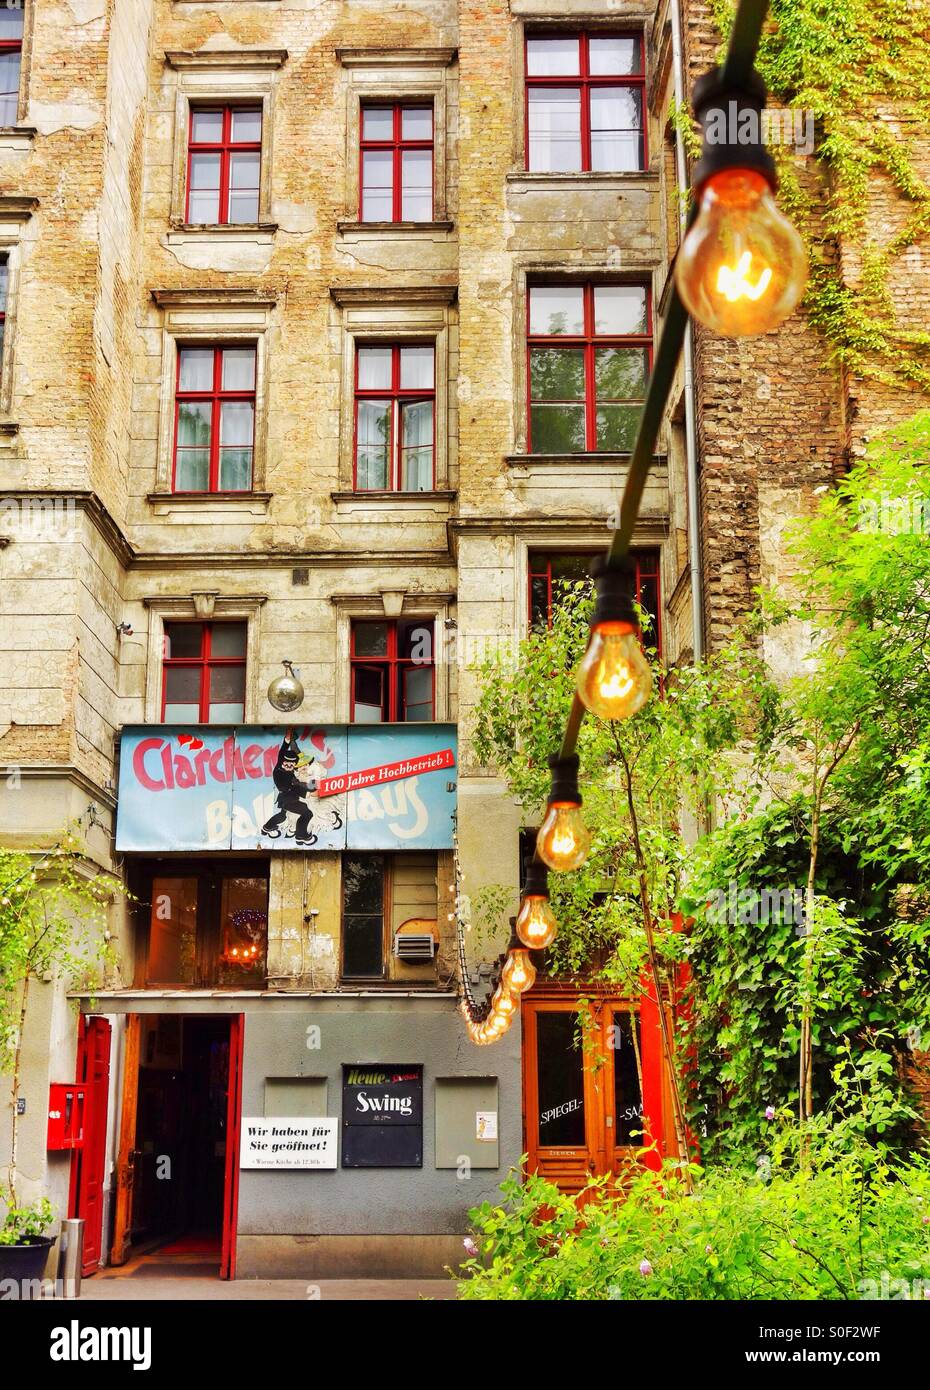 Clarchen's Ballhaus in Berlin Germany Stock Photo